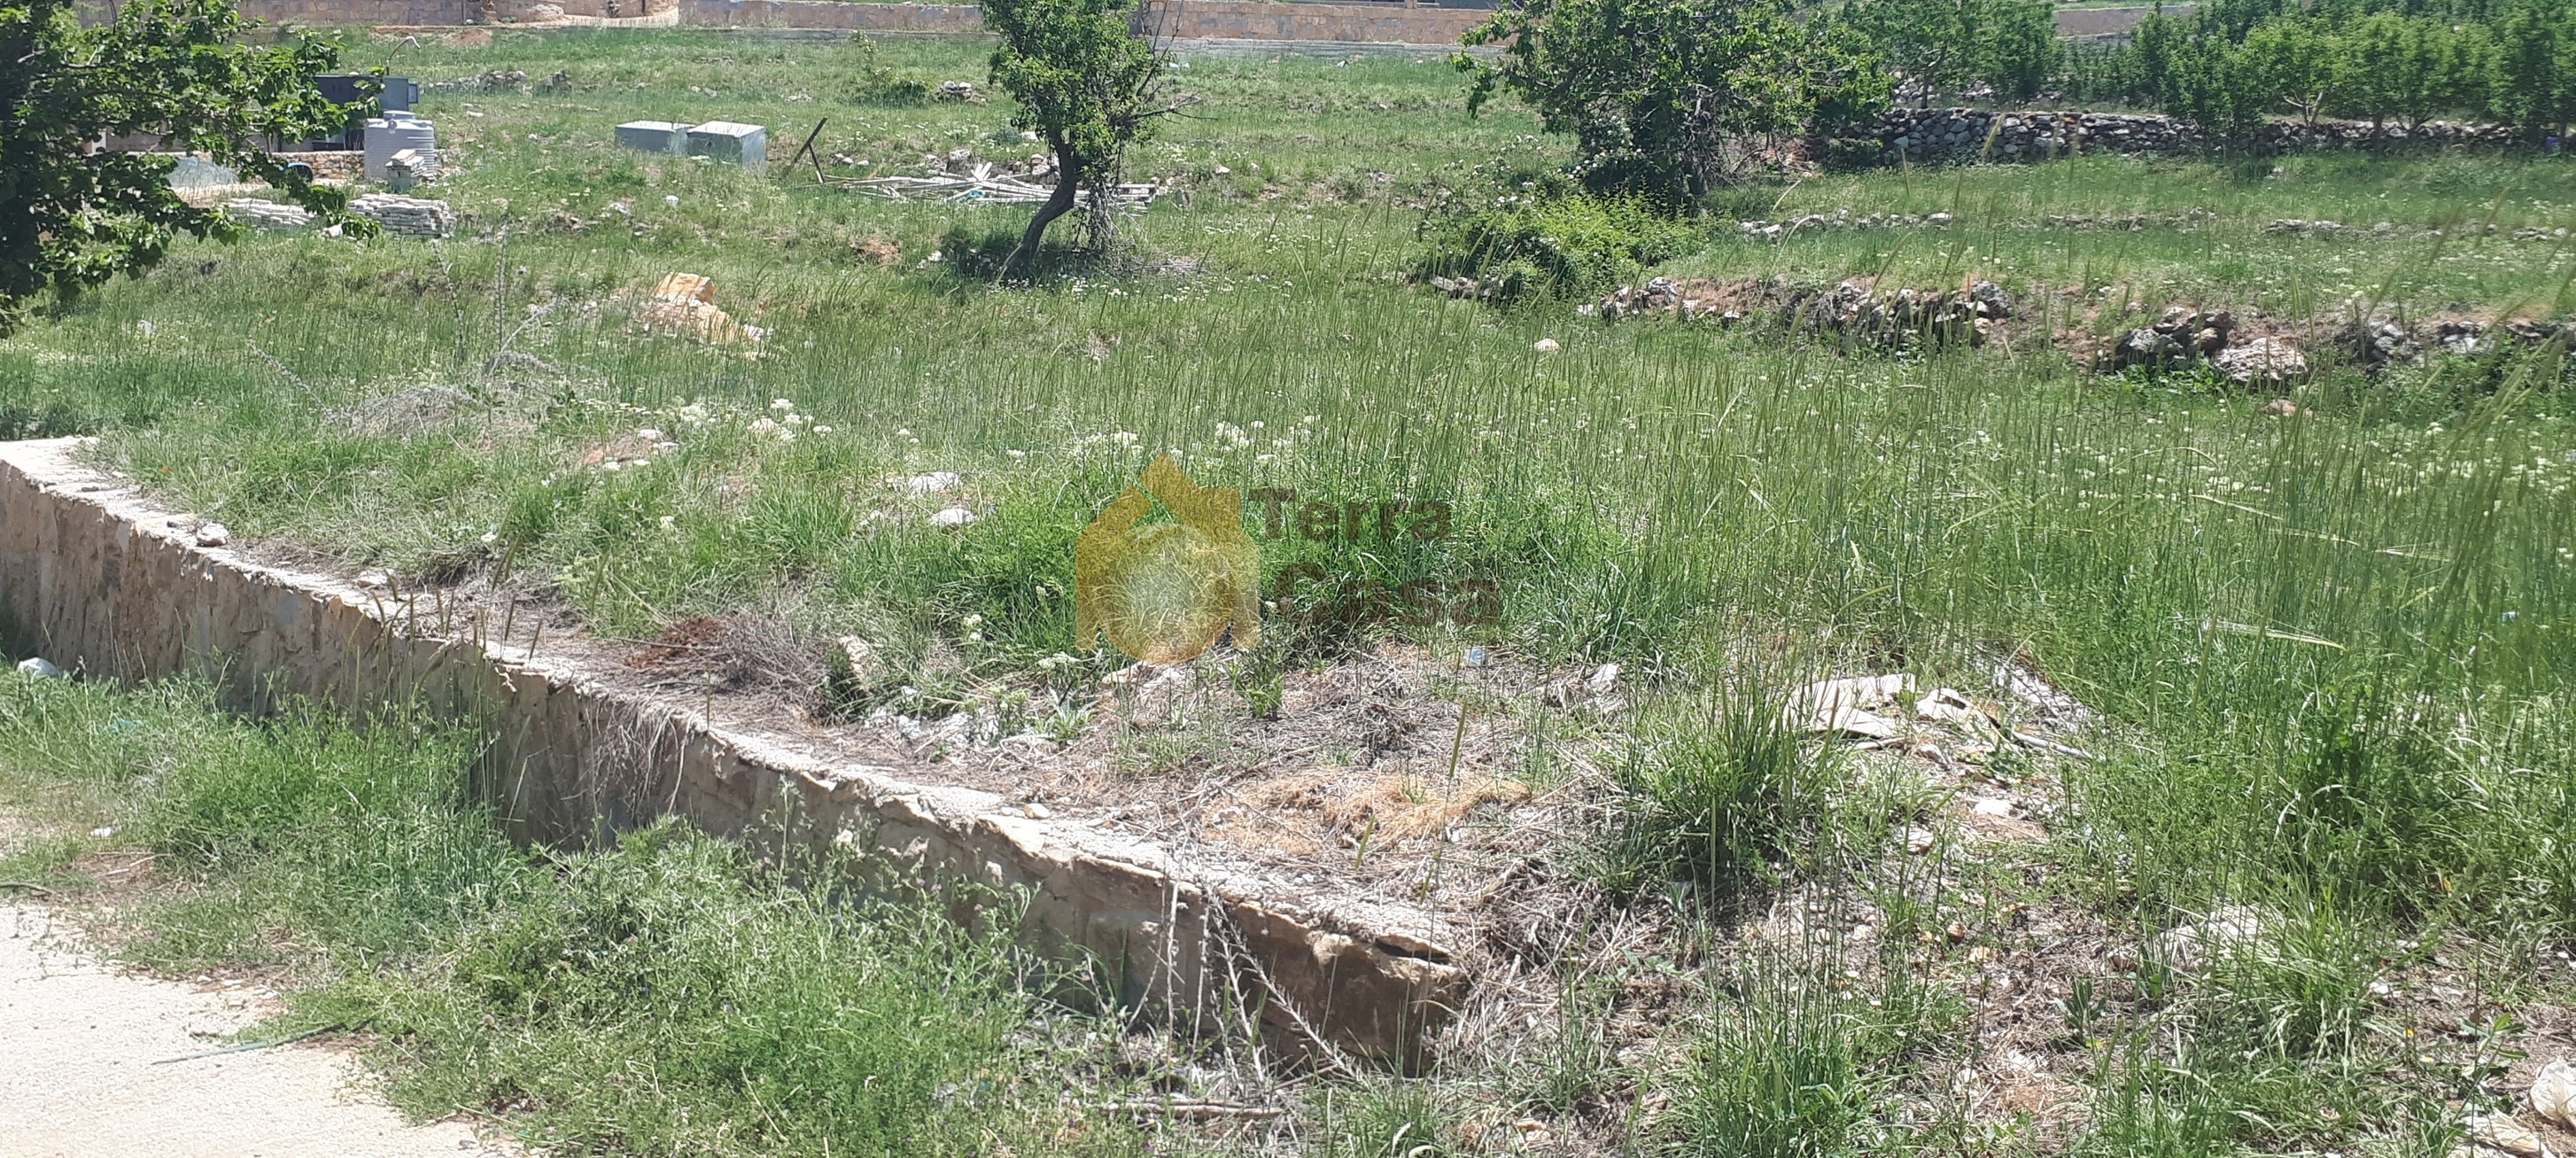 Sale land in Tarchich open view cash payment.